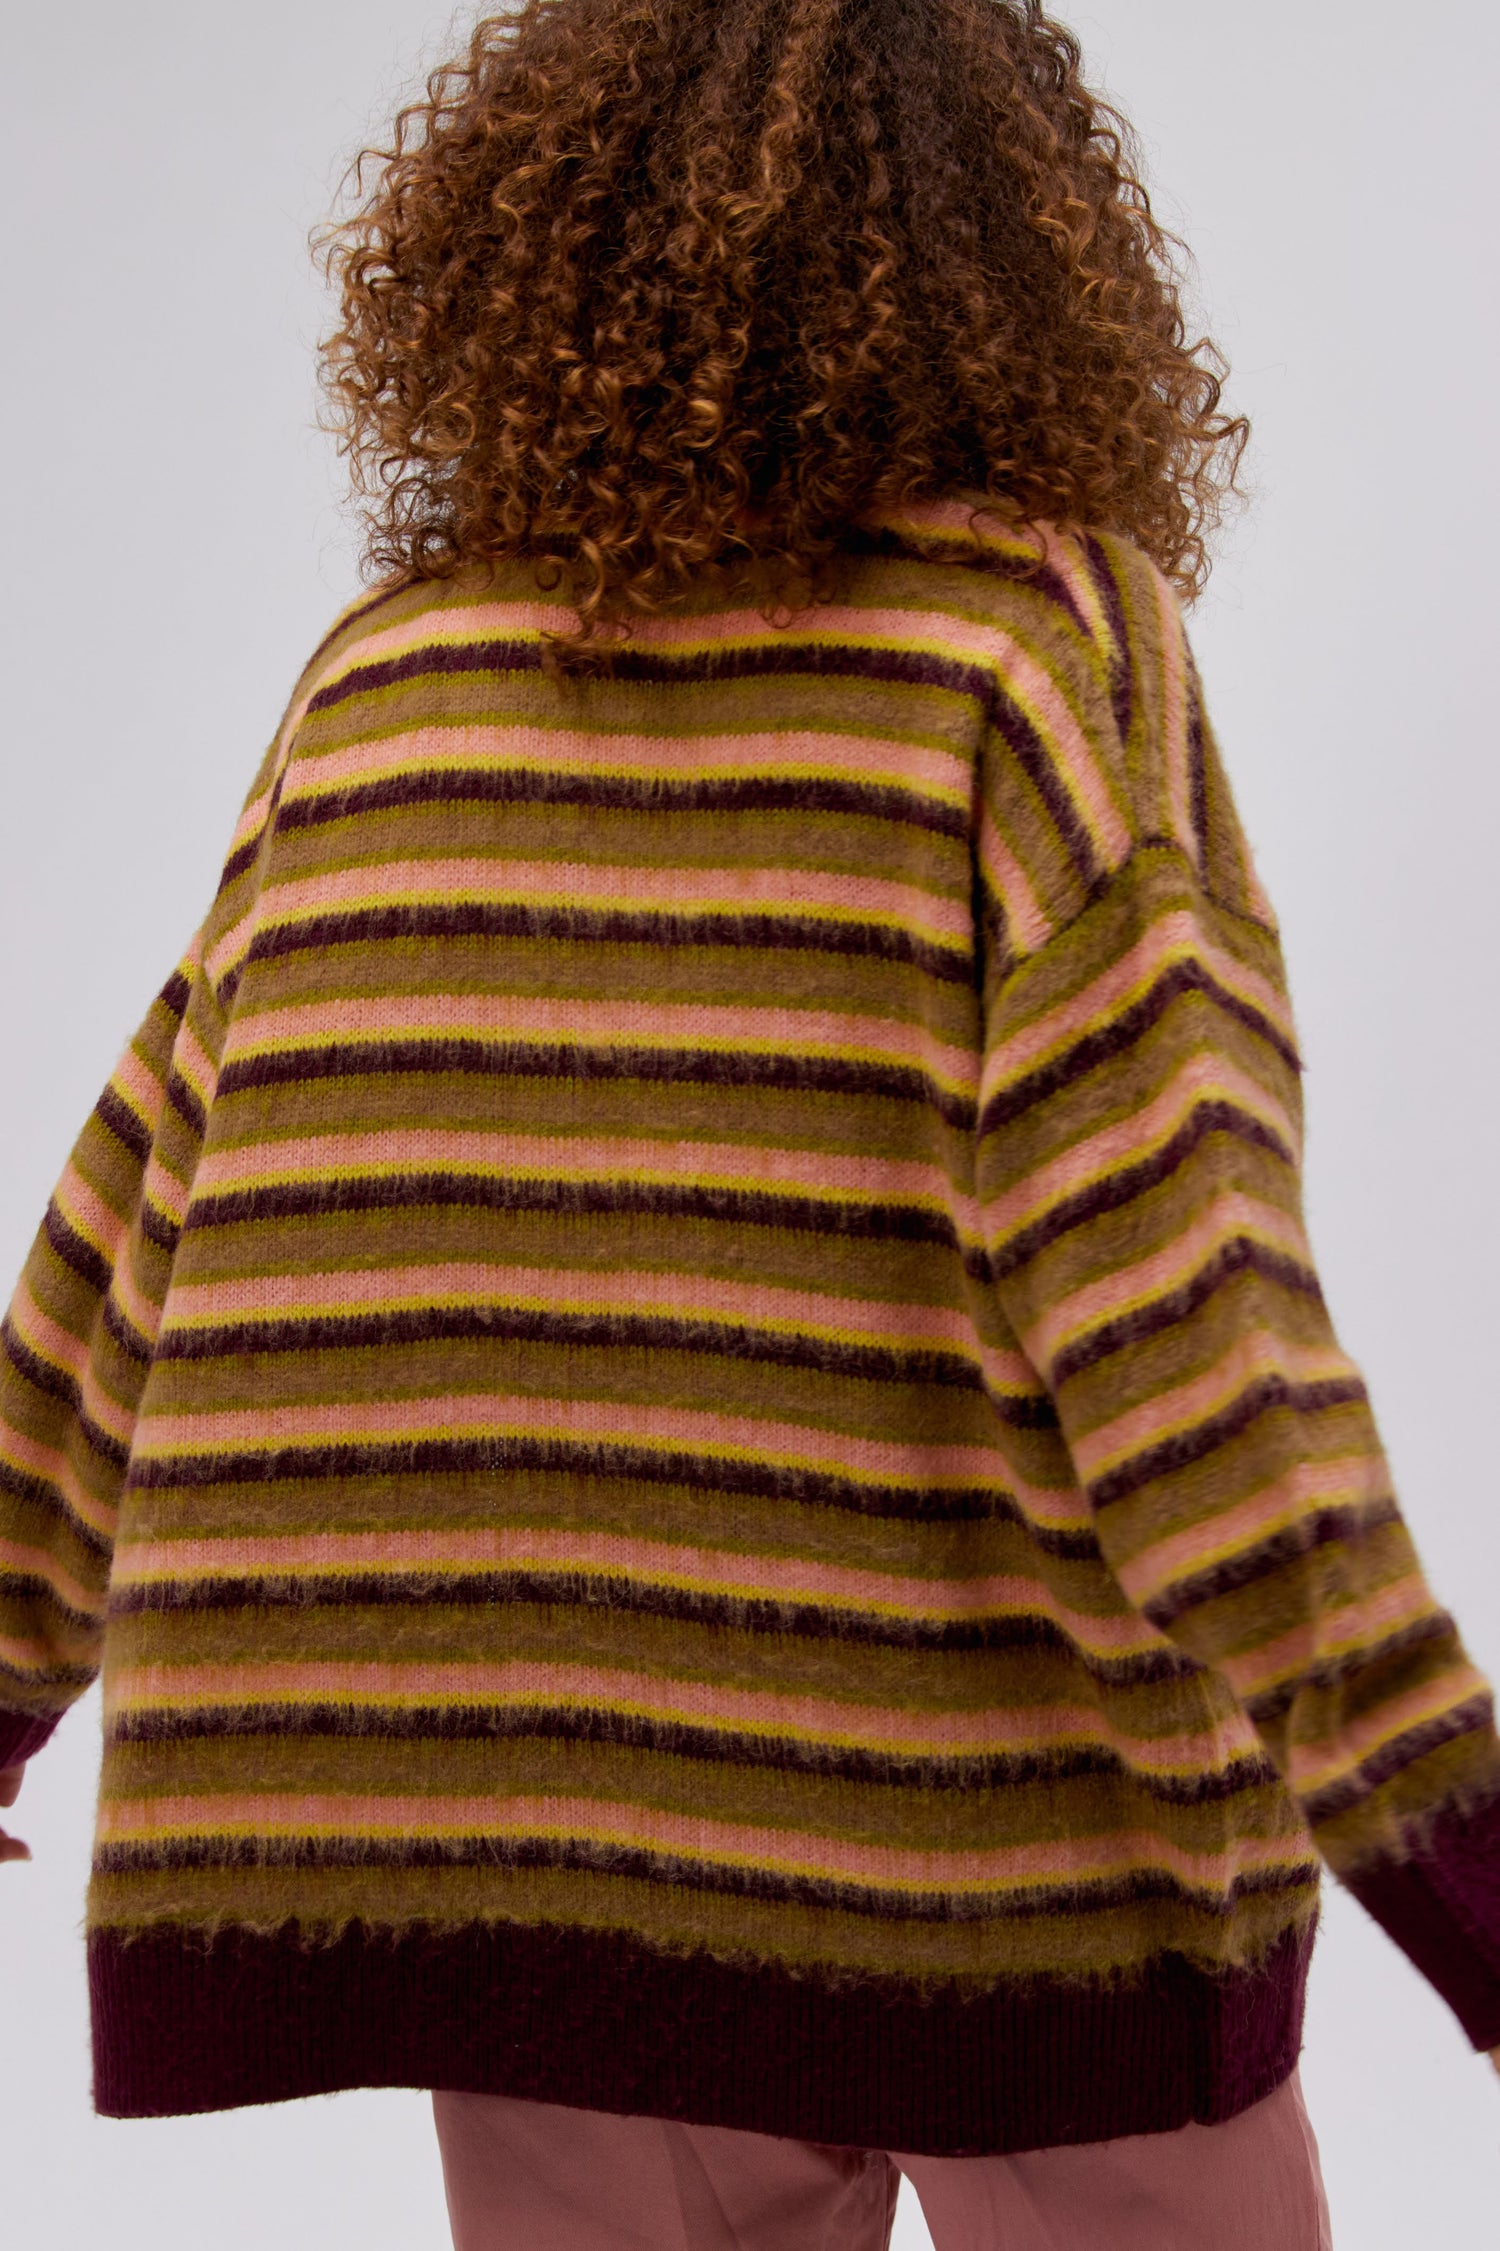 A curly-haired model featuring a cherry crush stripe cardigan.